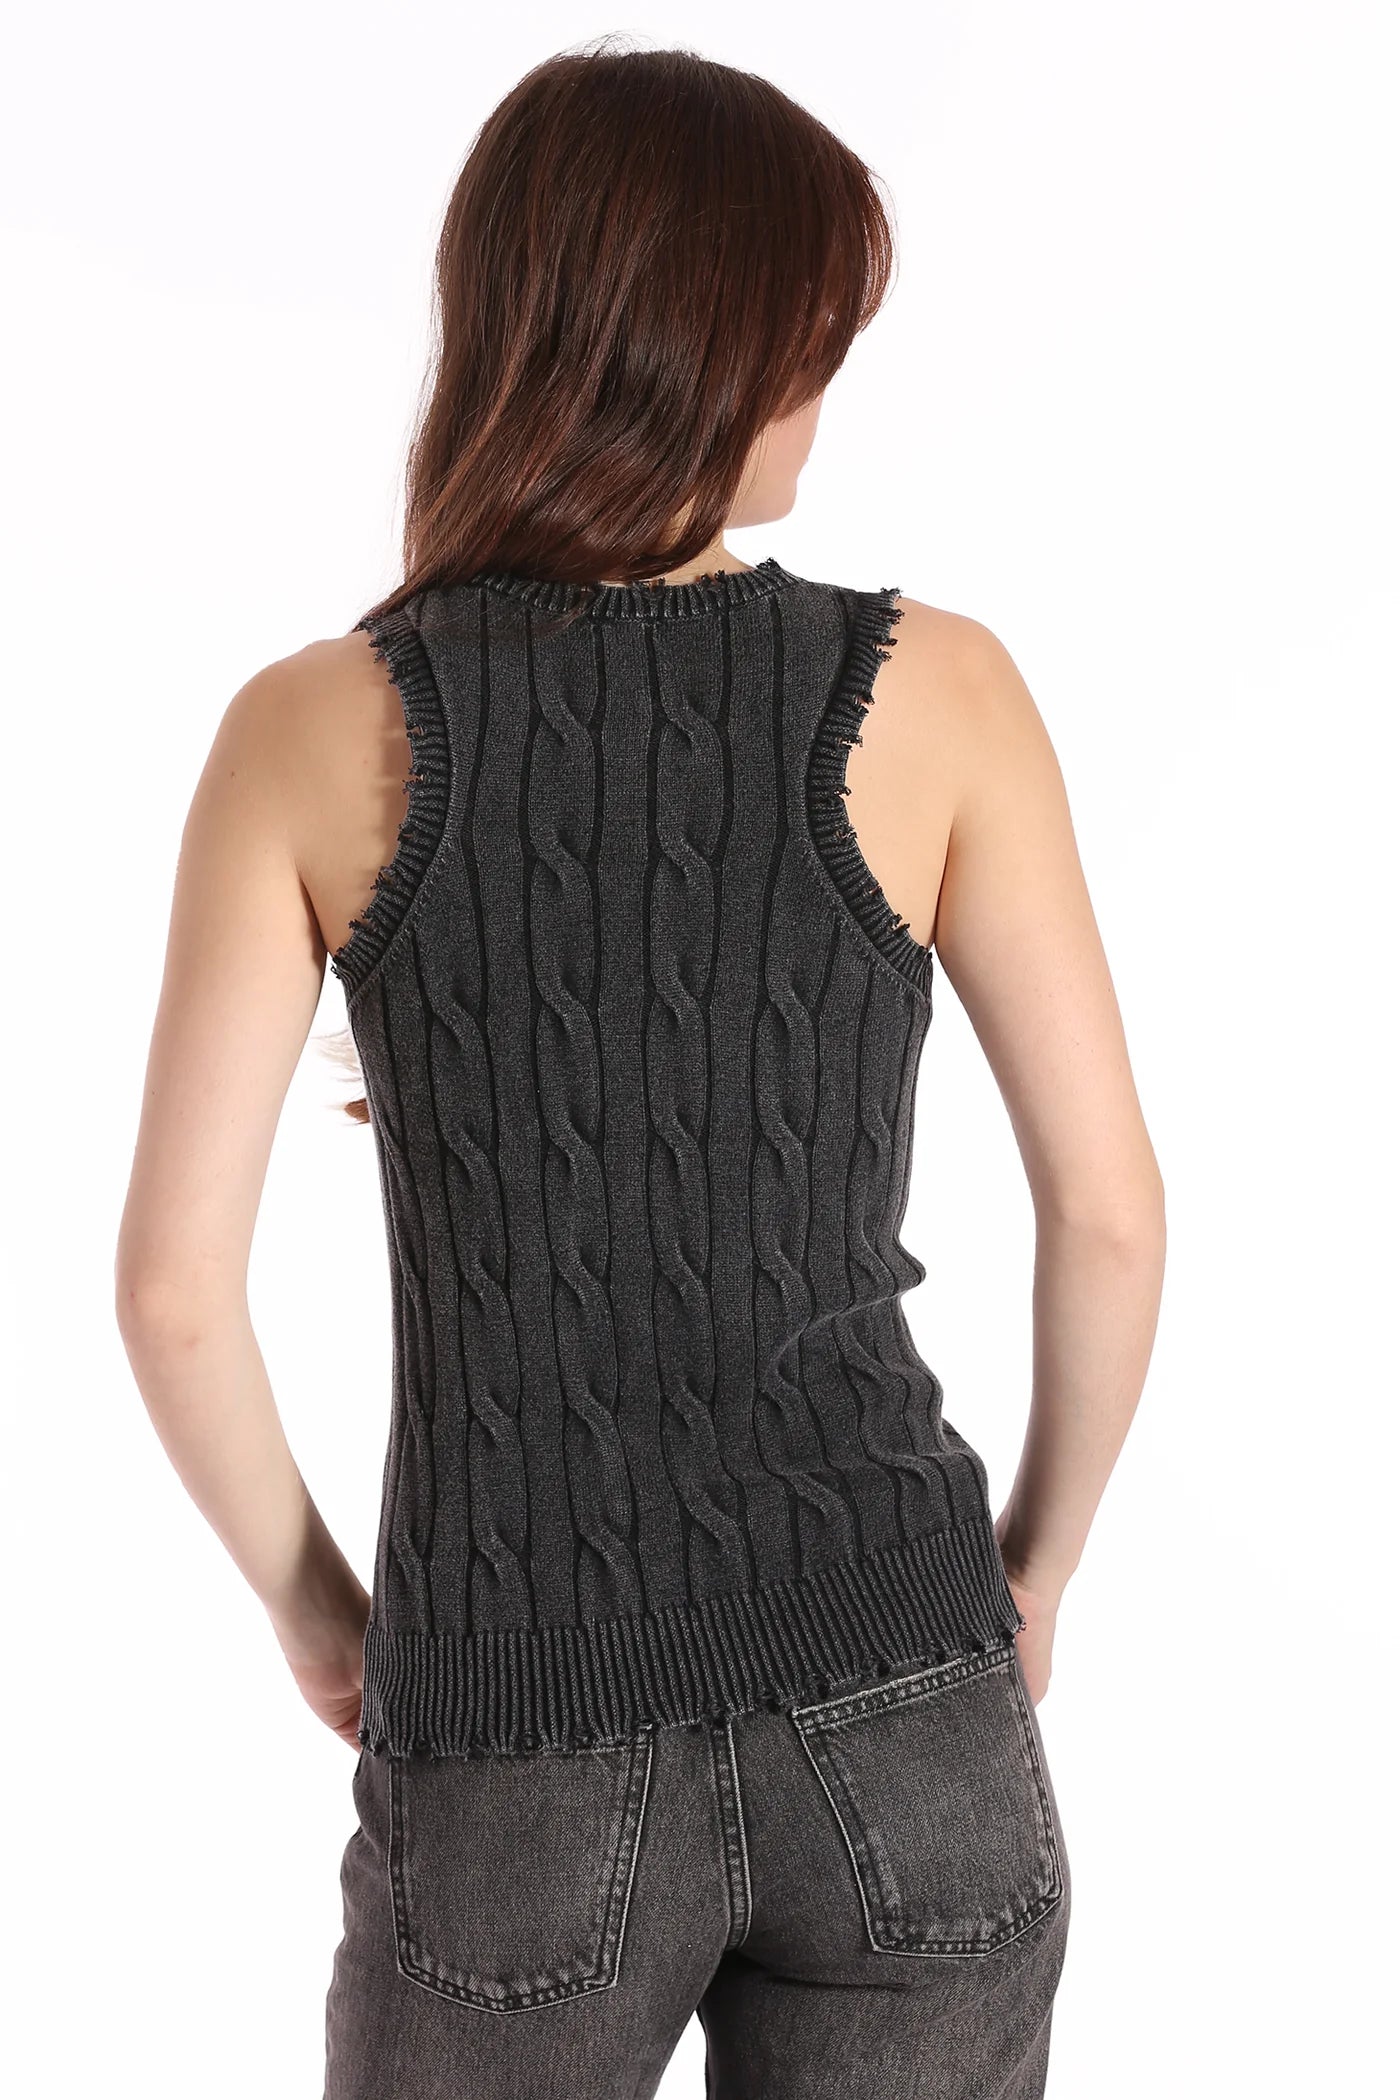 COTTON STONE WASH DISTRESSED CABLE TANK IN BLACK - Romi Boutique